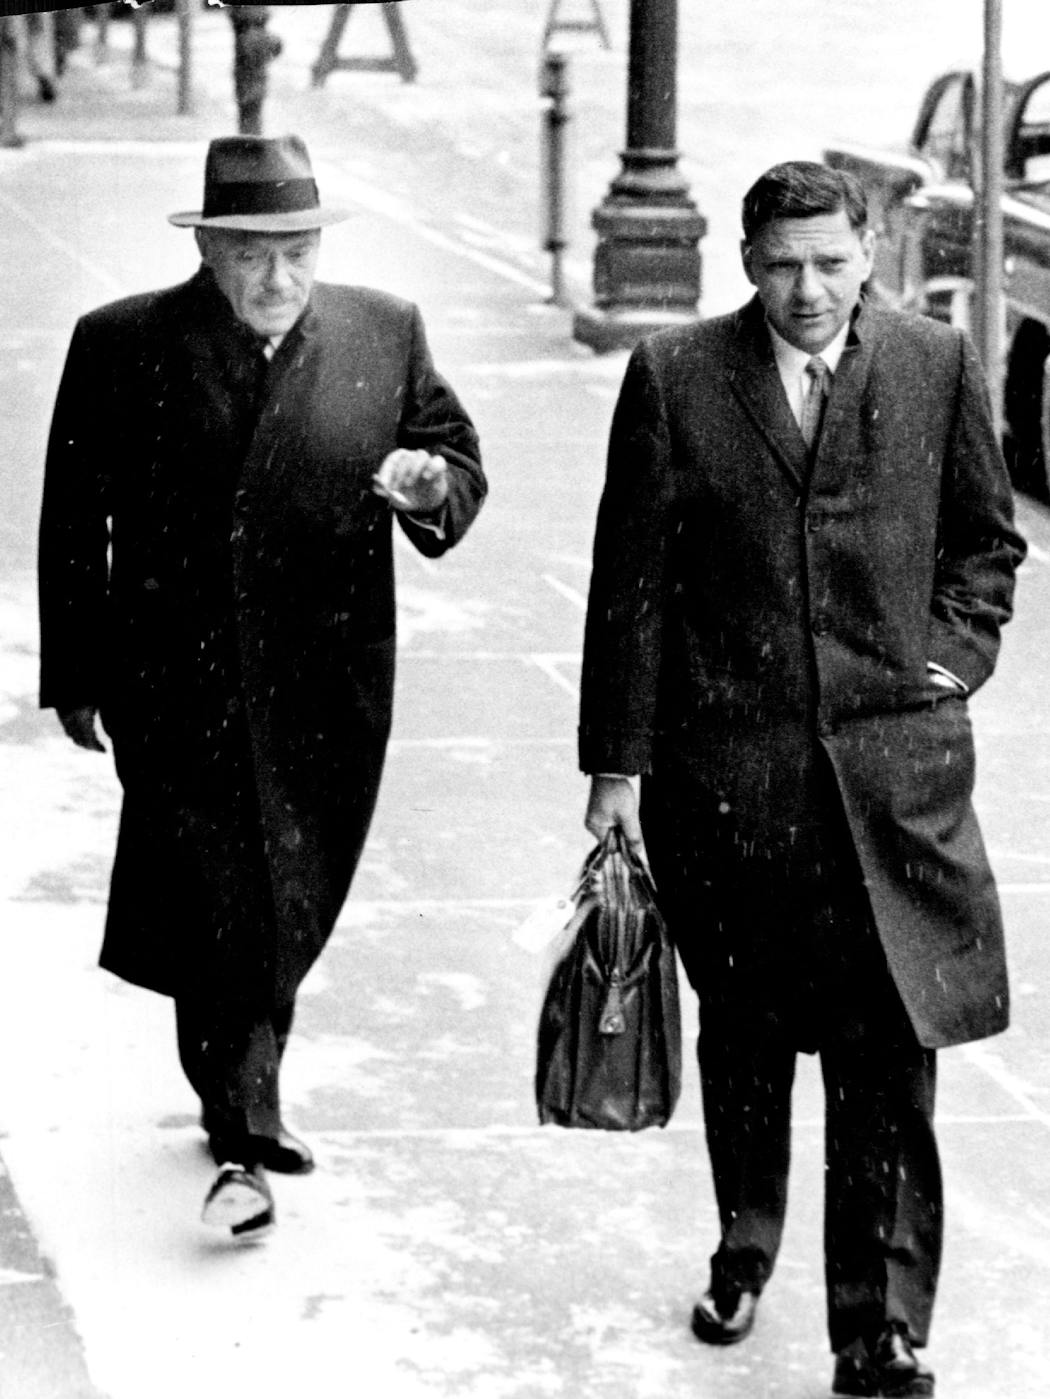 Isadore Blumenfeld walked with his attorney during proceedings related to the trafficking charges against him in 1960.